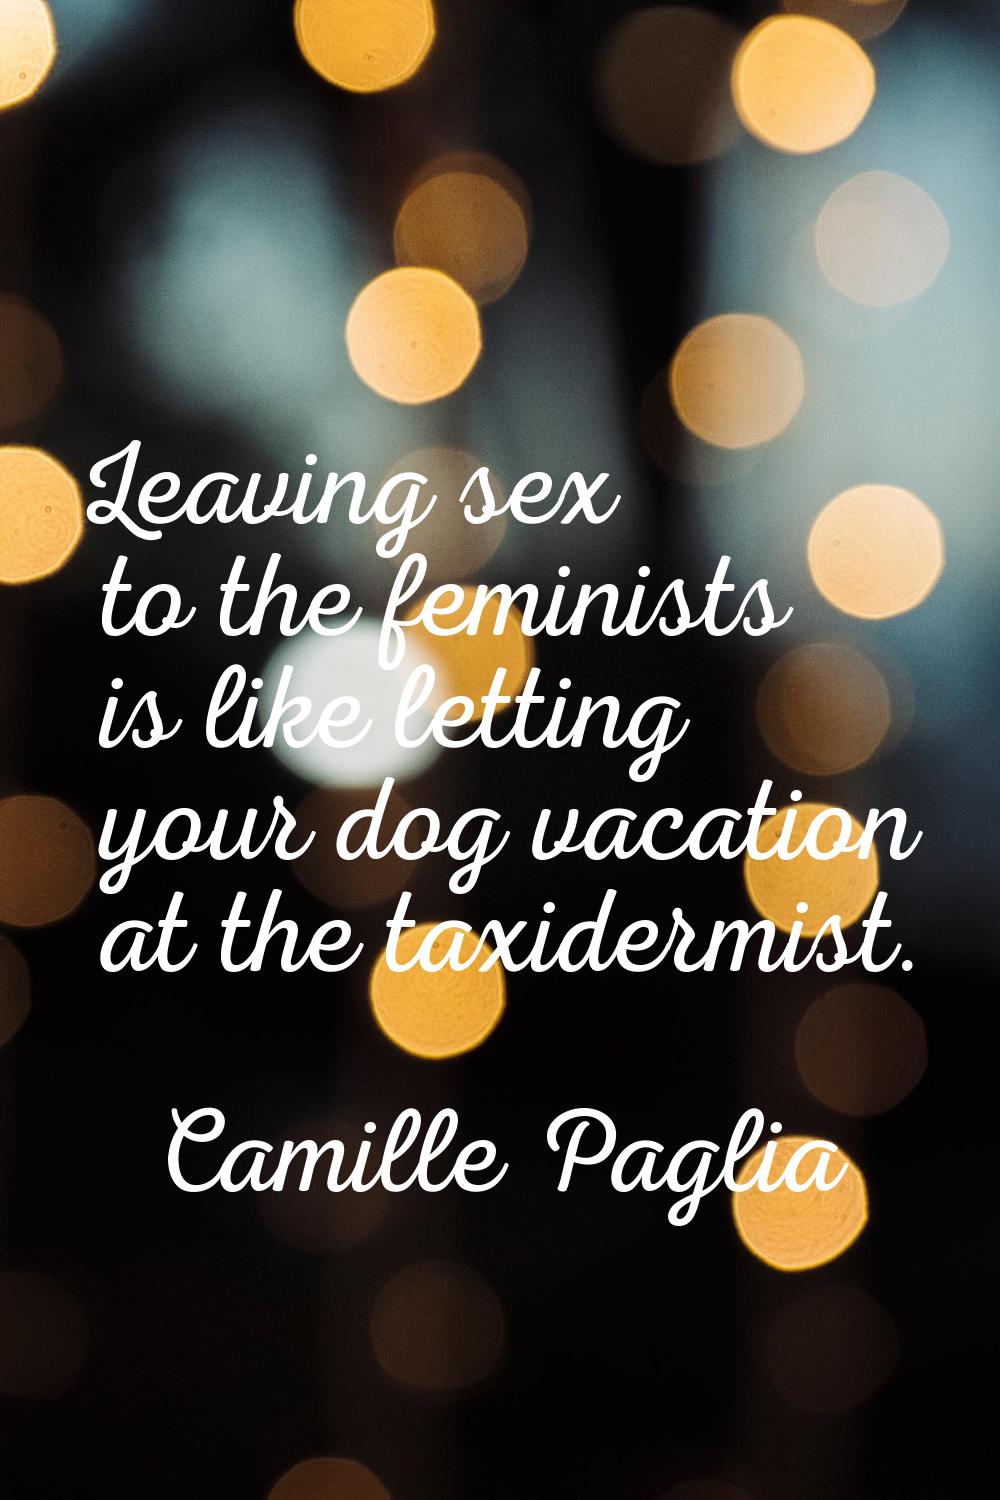 Leaving sex to the feminists is like letting your dog vacation at the taxidermist.